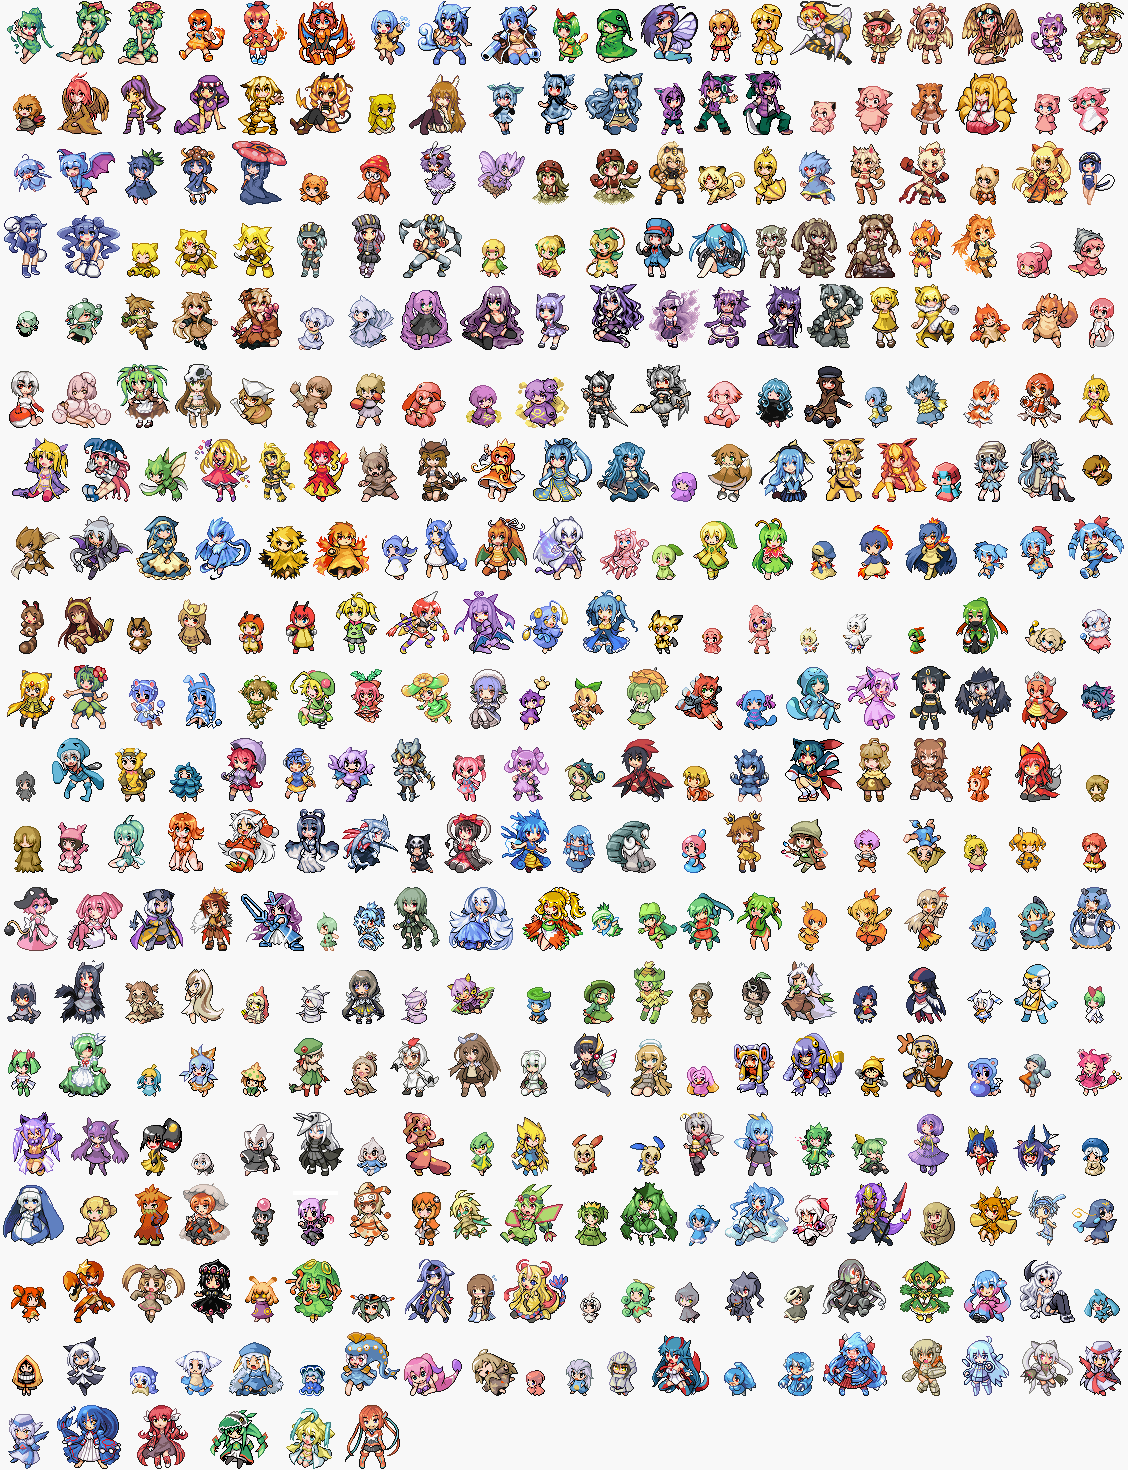 Also try: moemon pokemon fire red droid, moemon pokemon fire red ...